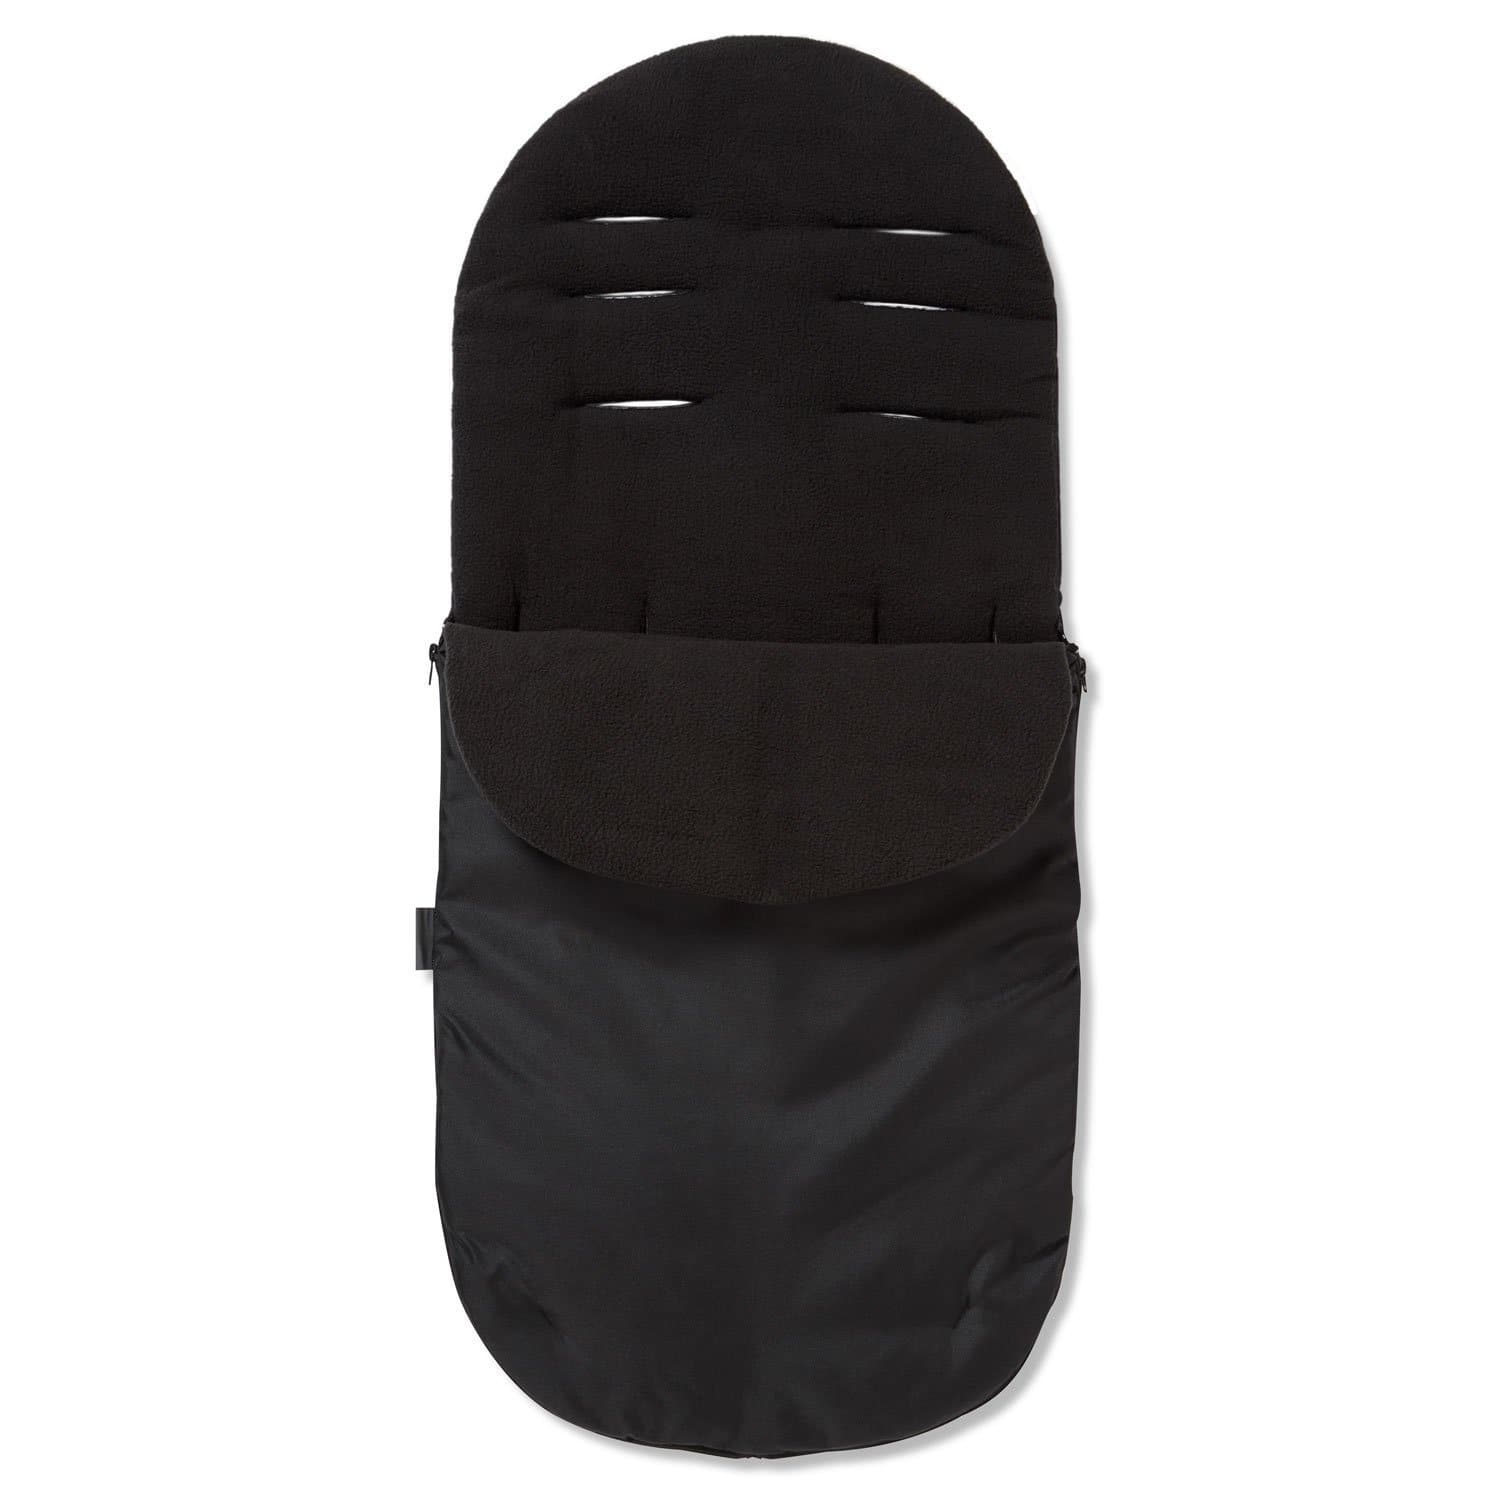 Footmuff / Cosy Toes Compatible with Seed - Black / Fits All Models | For Your Little One